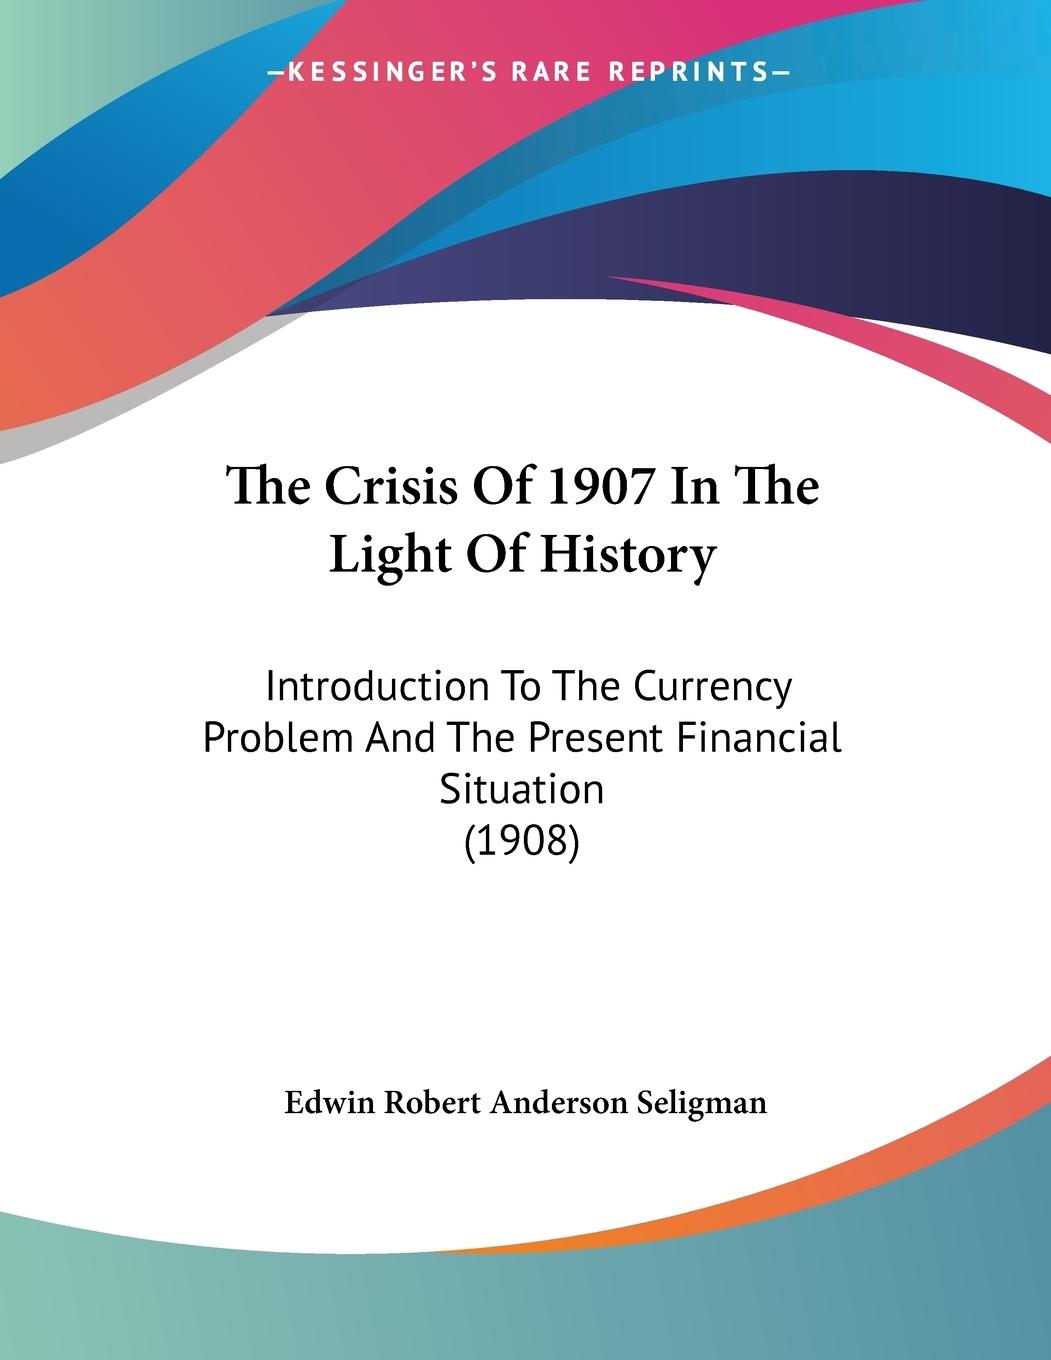 The Crisis Of 1907 In The Light Of History - Seligman, Edwin Robert Anderson